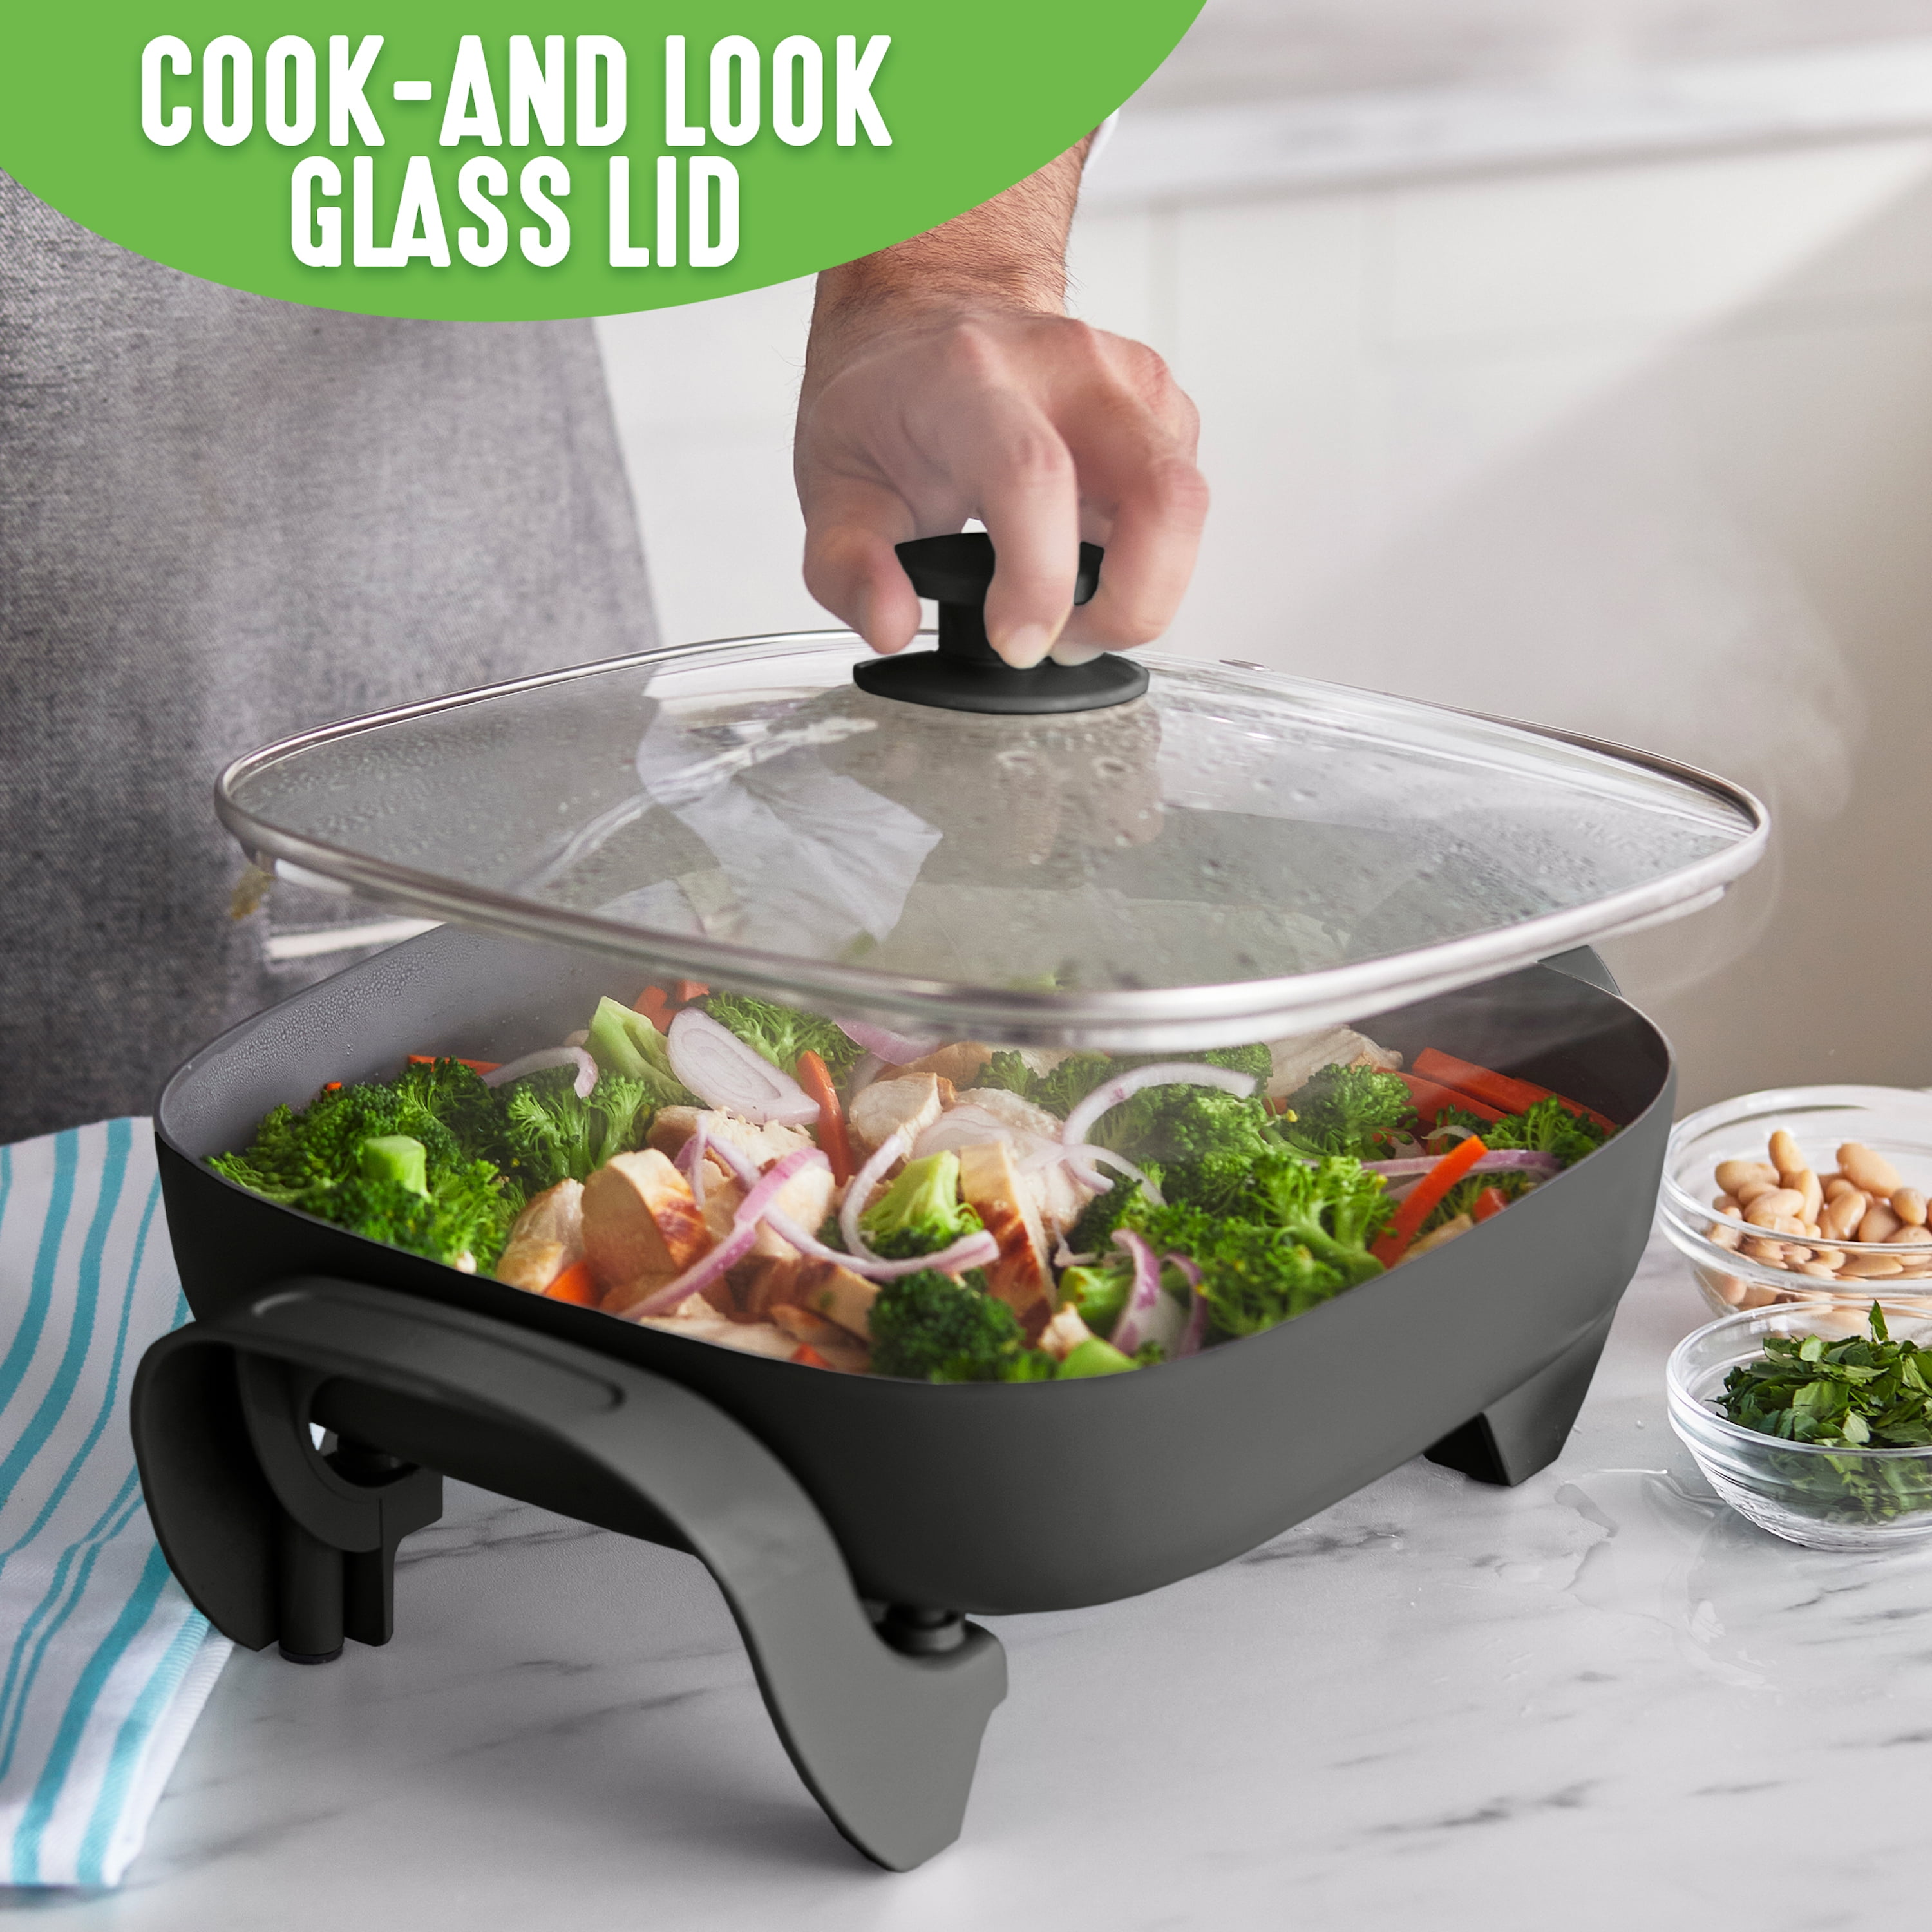  Square Non-Stick Electric Skillet with Glass Lid - 8: Home &  Kitchen